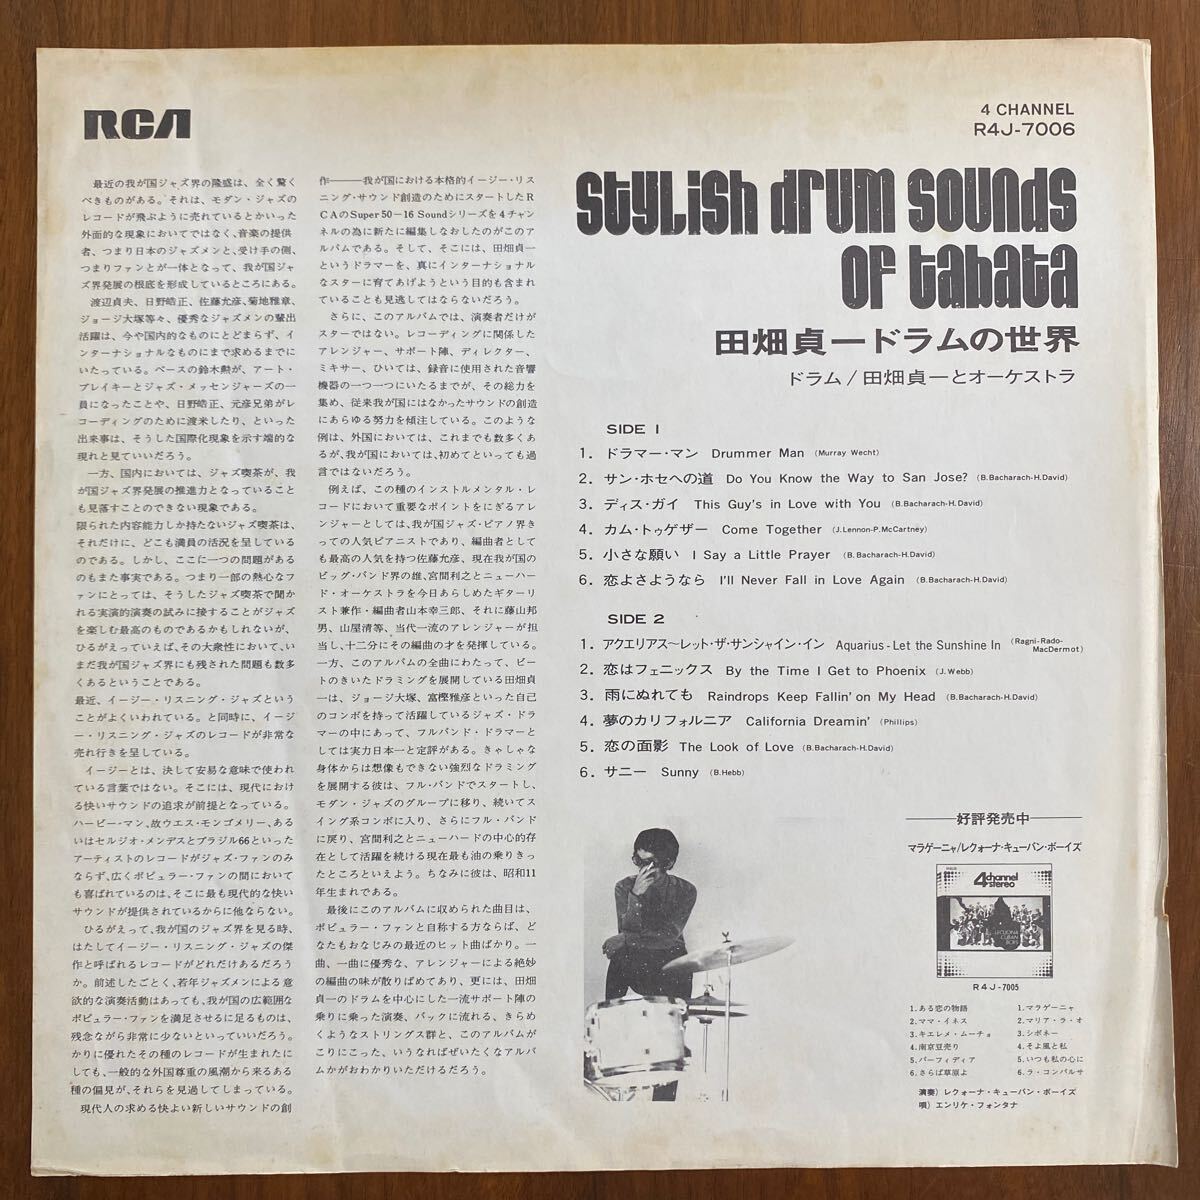 LP STYLISH DRUM SOUNDS OF TABATA rice field field . one drum. world manual attaching peace mono glue vu western-style music cover CD-4